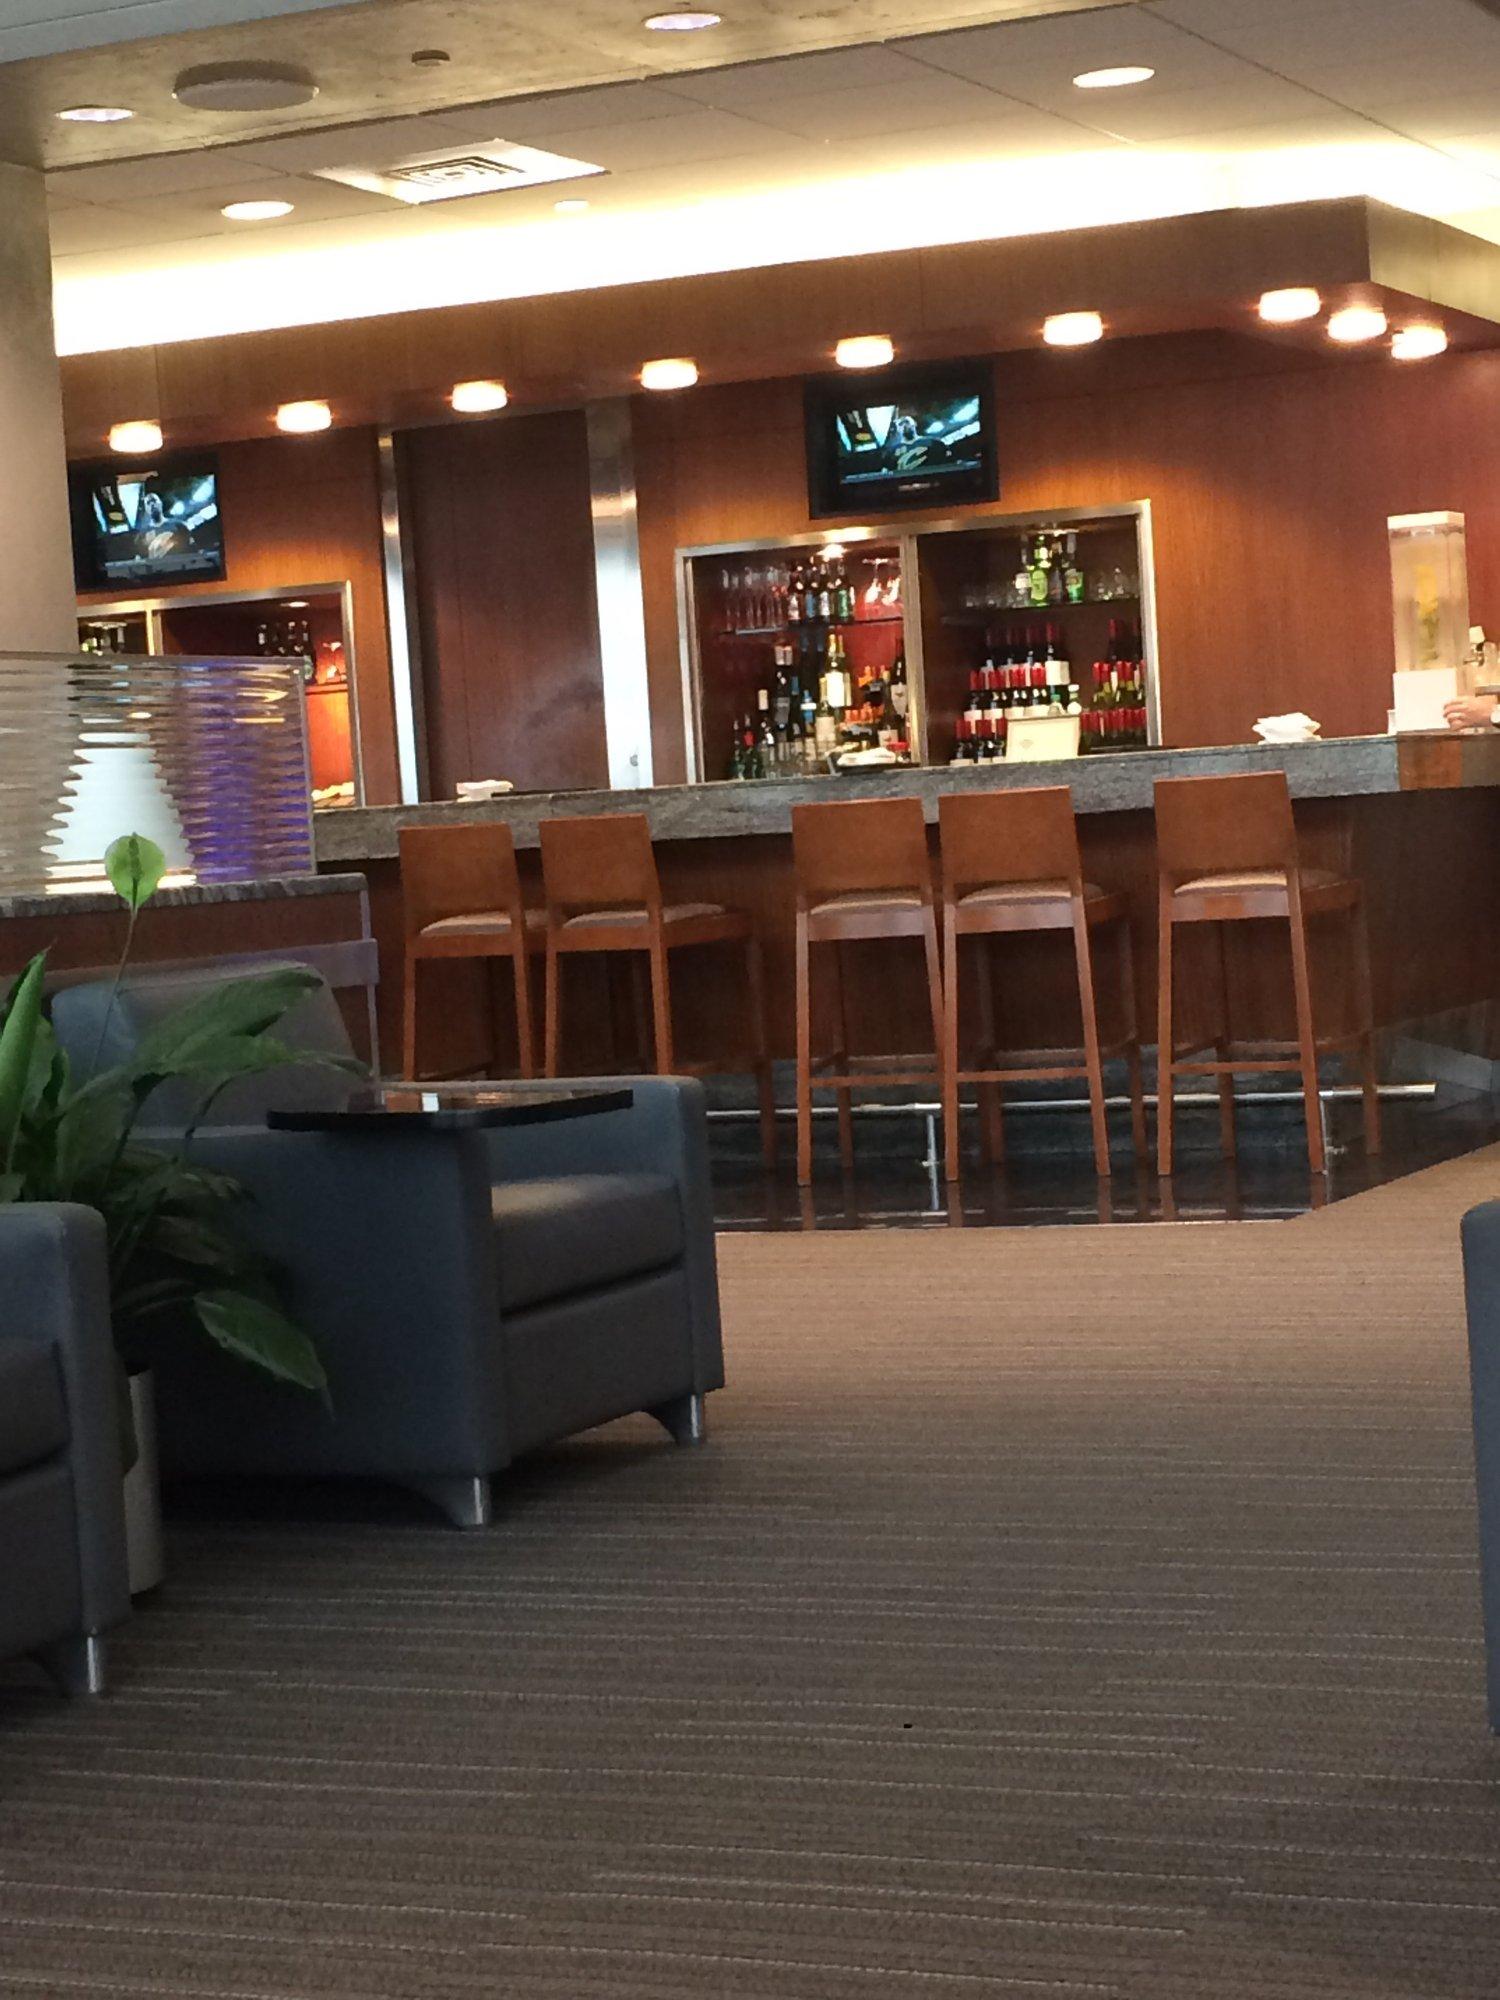 American Airlines Admirals Club image 14 of 48